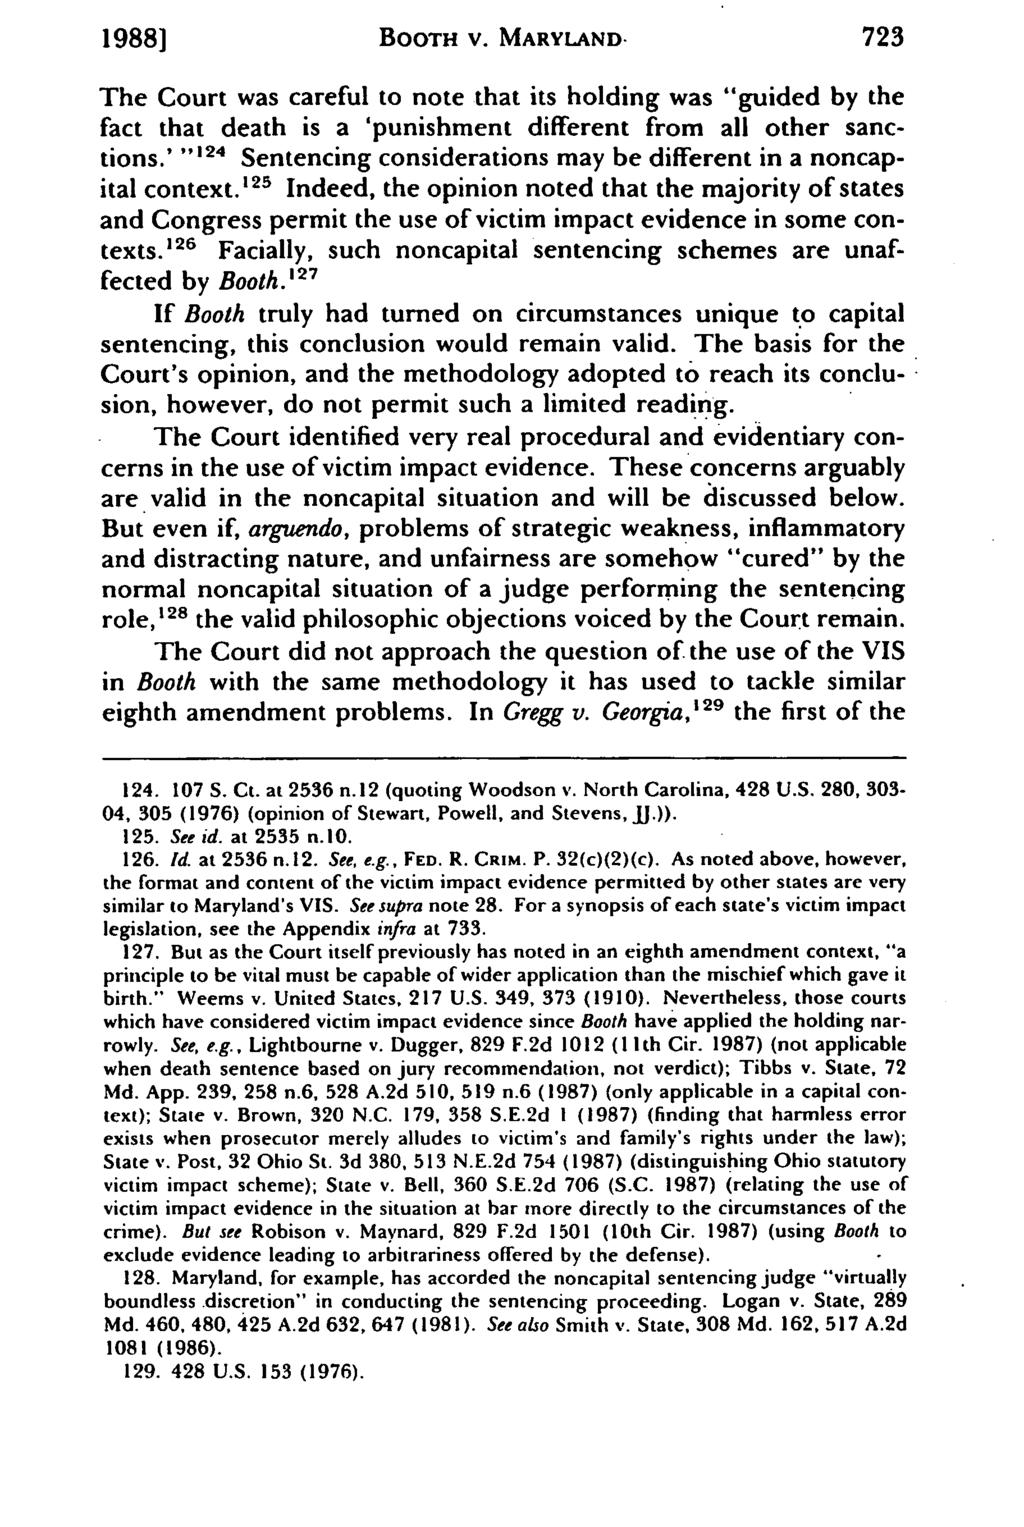 1988] BOOTH V. MARYLAND- 723 The Court was careful to note that its holding was "guided by the fact that death is a 'punishment different from all other sanctions.